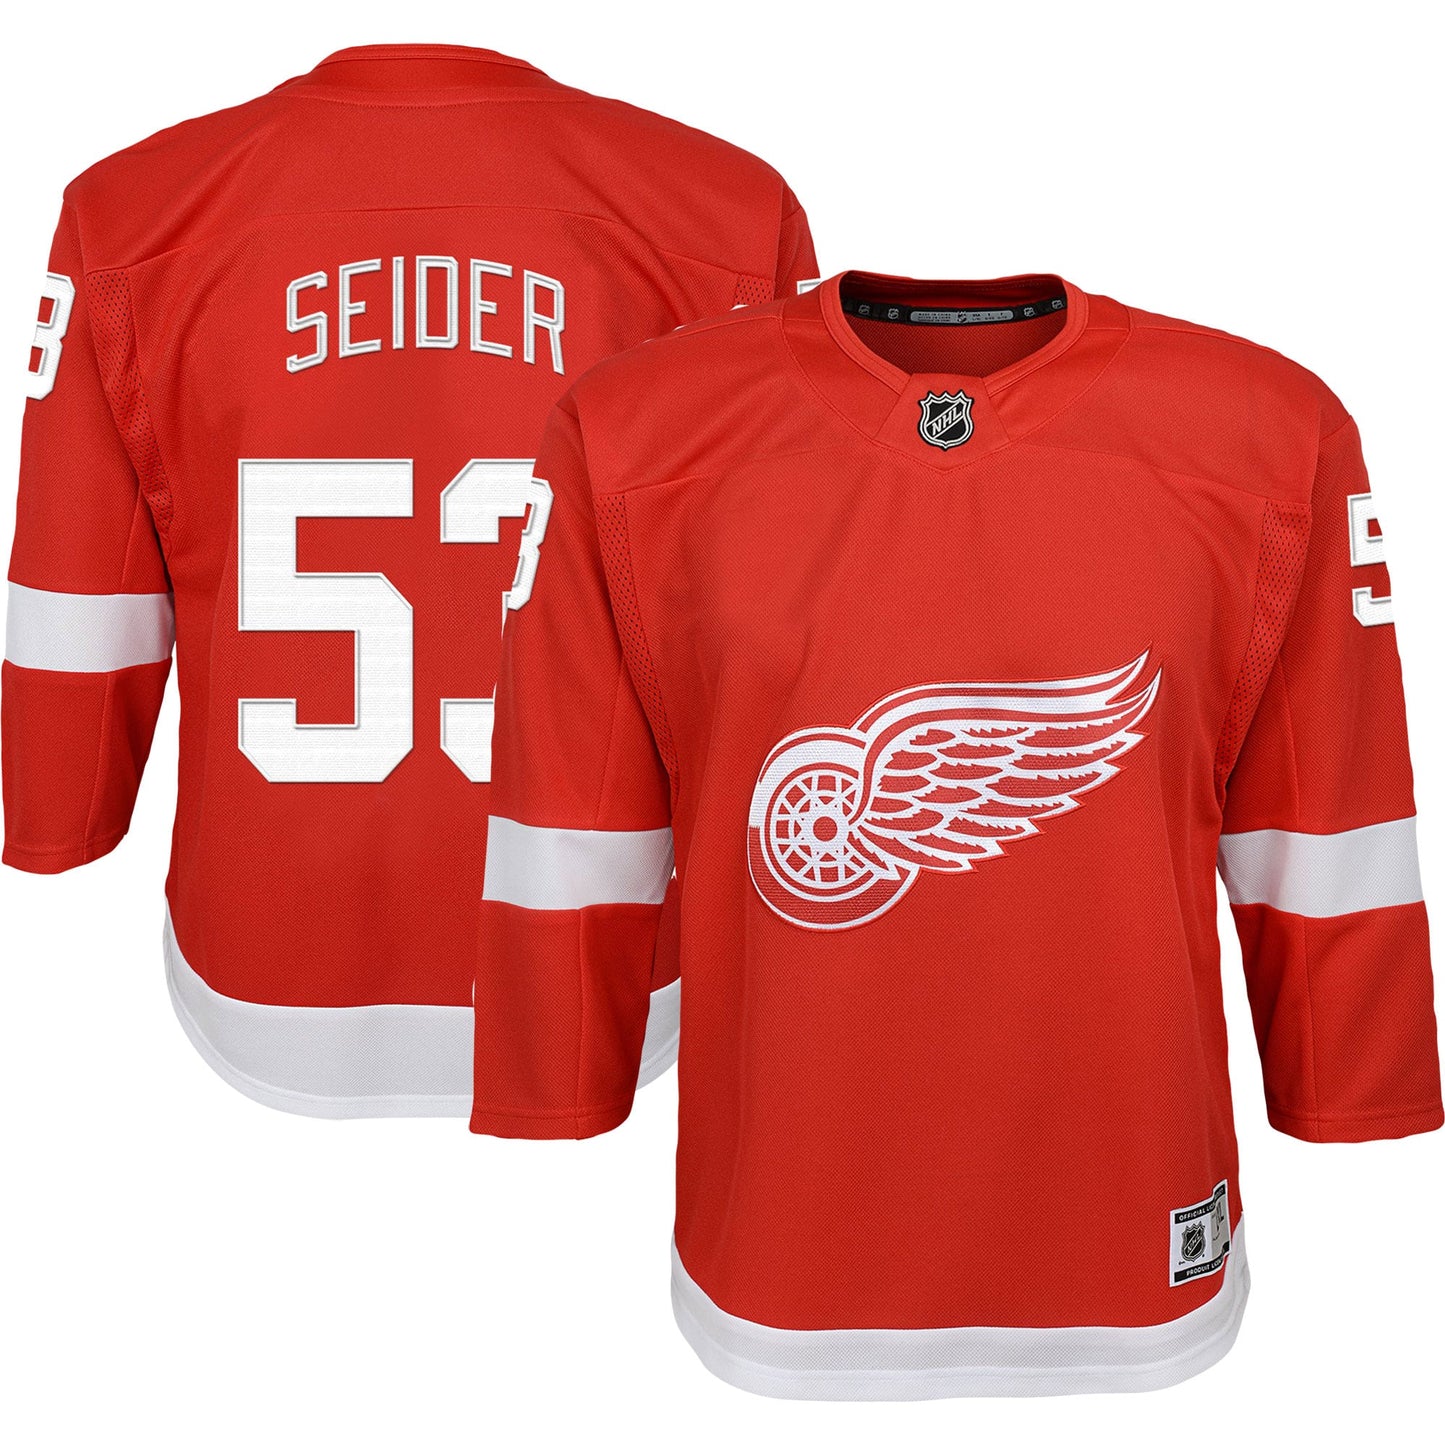 Moritz Seider Detroit Red Wings Youth 2022/23 Premier Player Jersey - Red